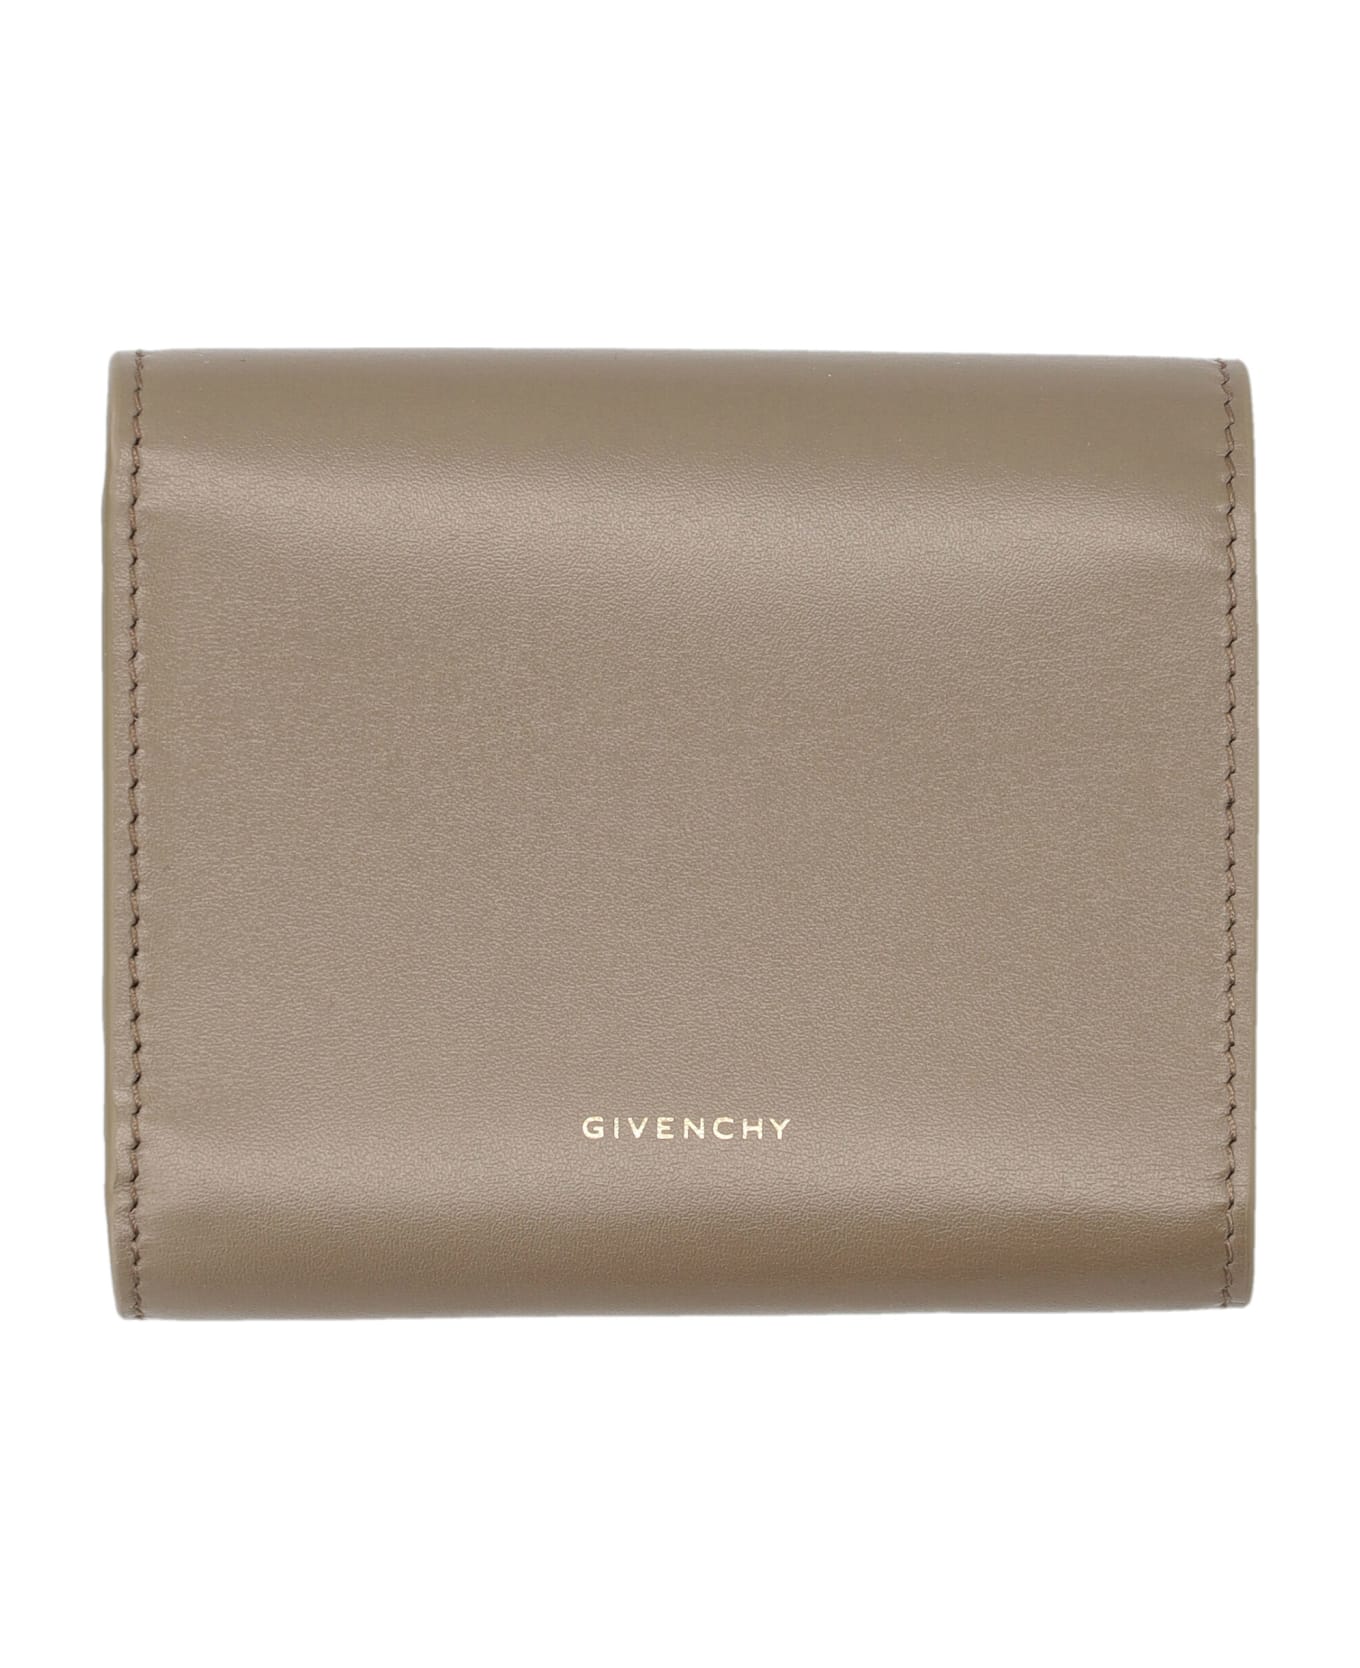 Givenchy 4g- Trifold Wallet - TAUPE